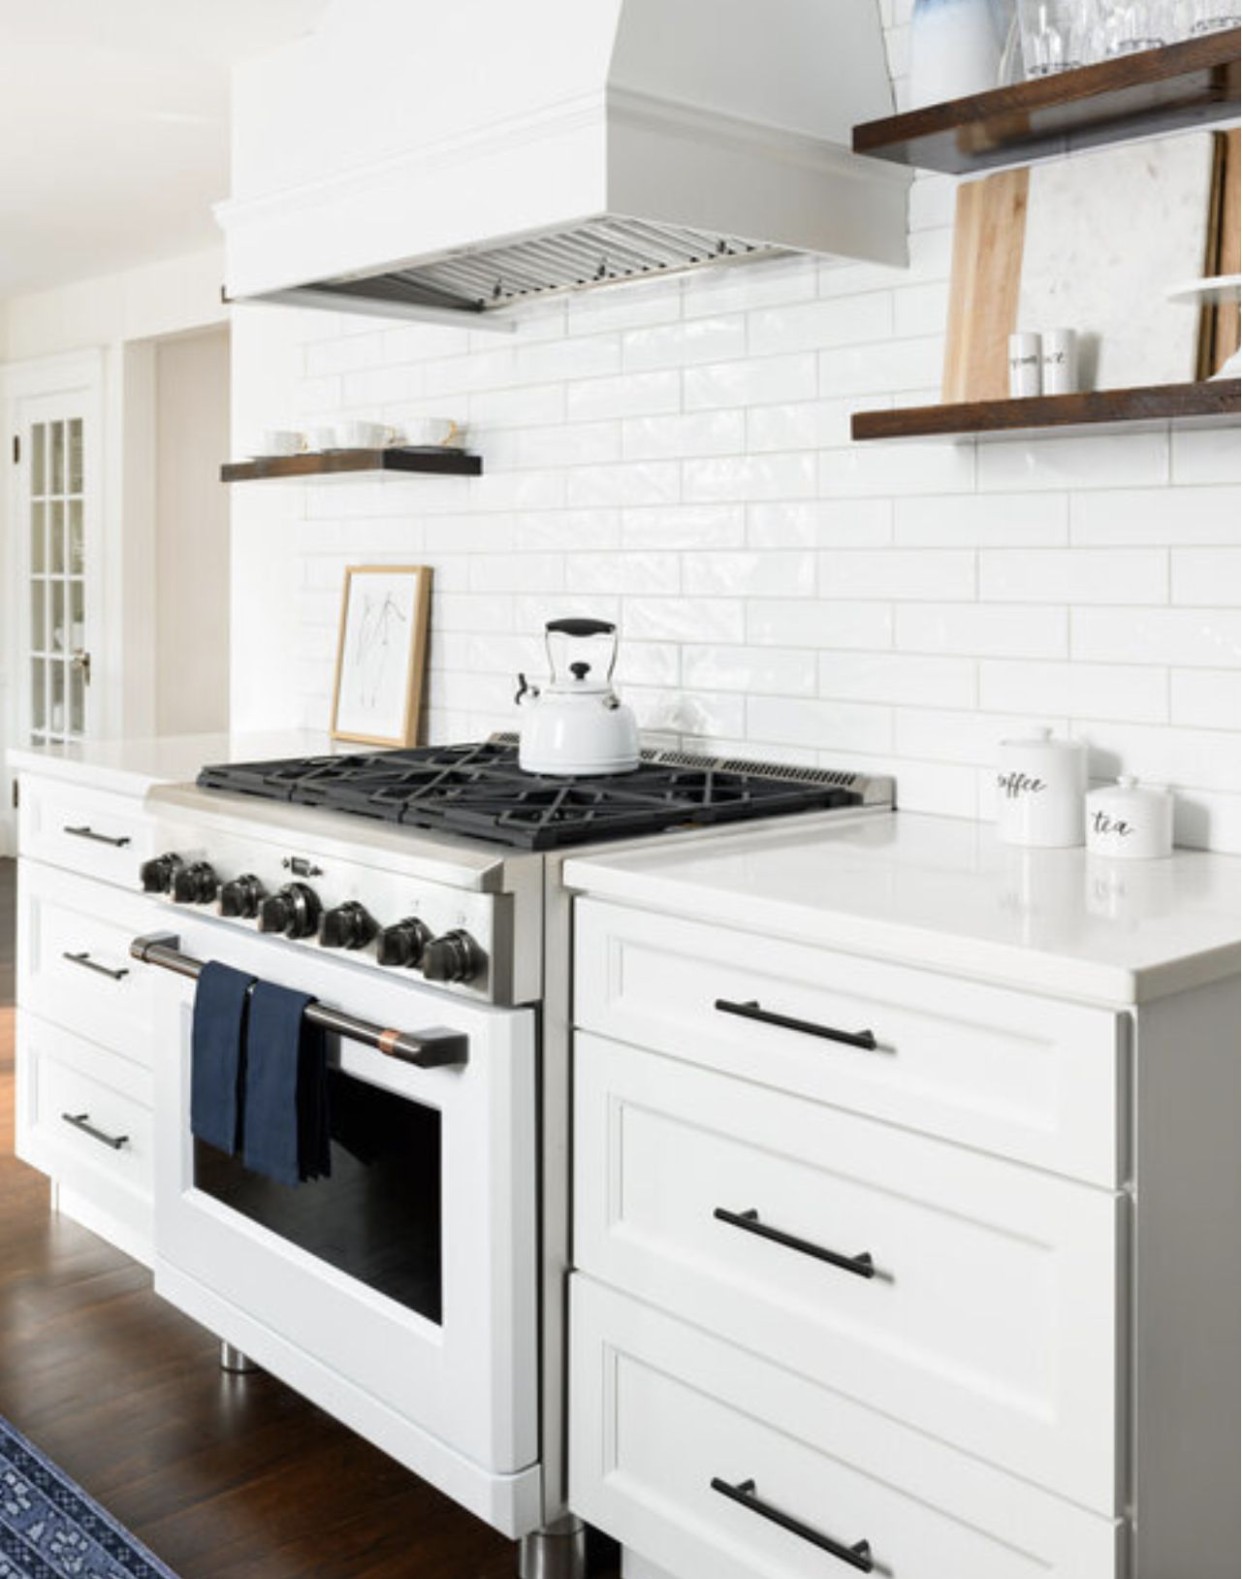 10 Stylish White Kitchen Appliance Ideas for Any Kitchen - white kitchen appliances